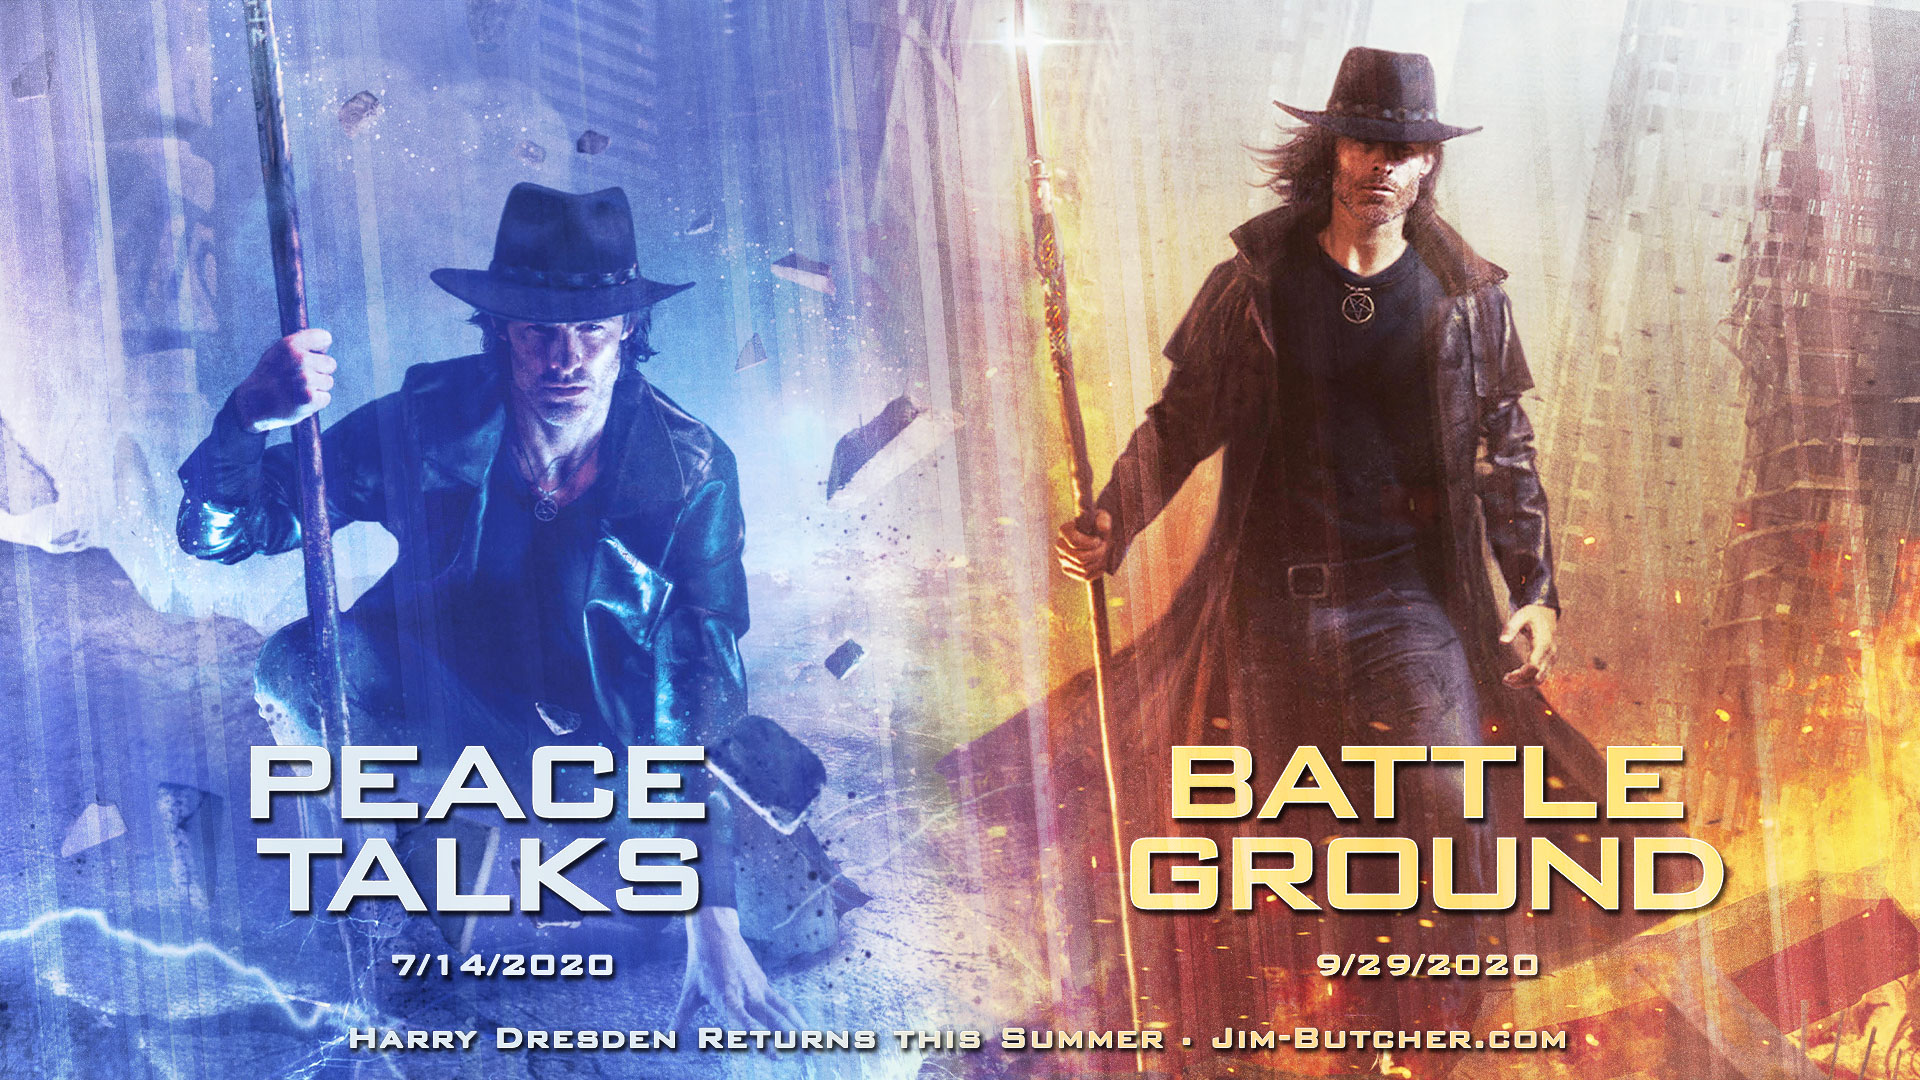 Should You Read The Dresden Files? A Personal Take, by Girish